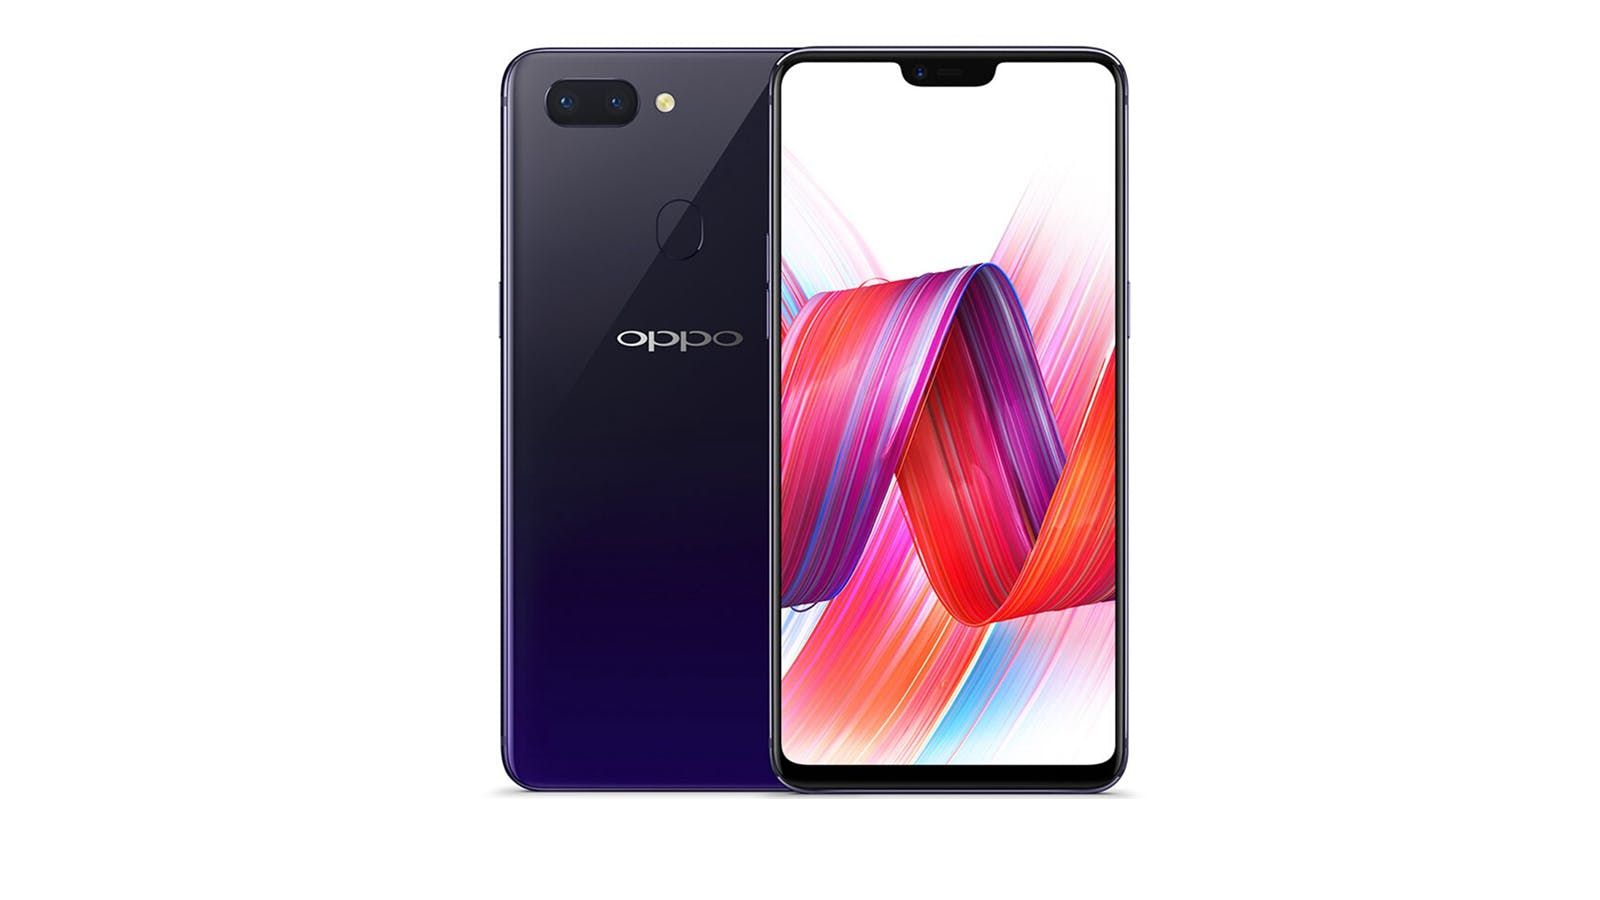 Oppo R15 Pro with 6.28-inch HD+ display launched in India for Rs 25,990